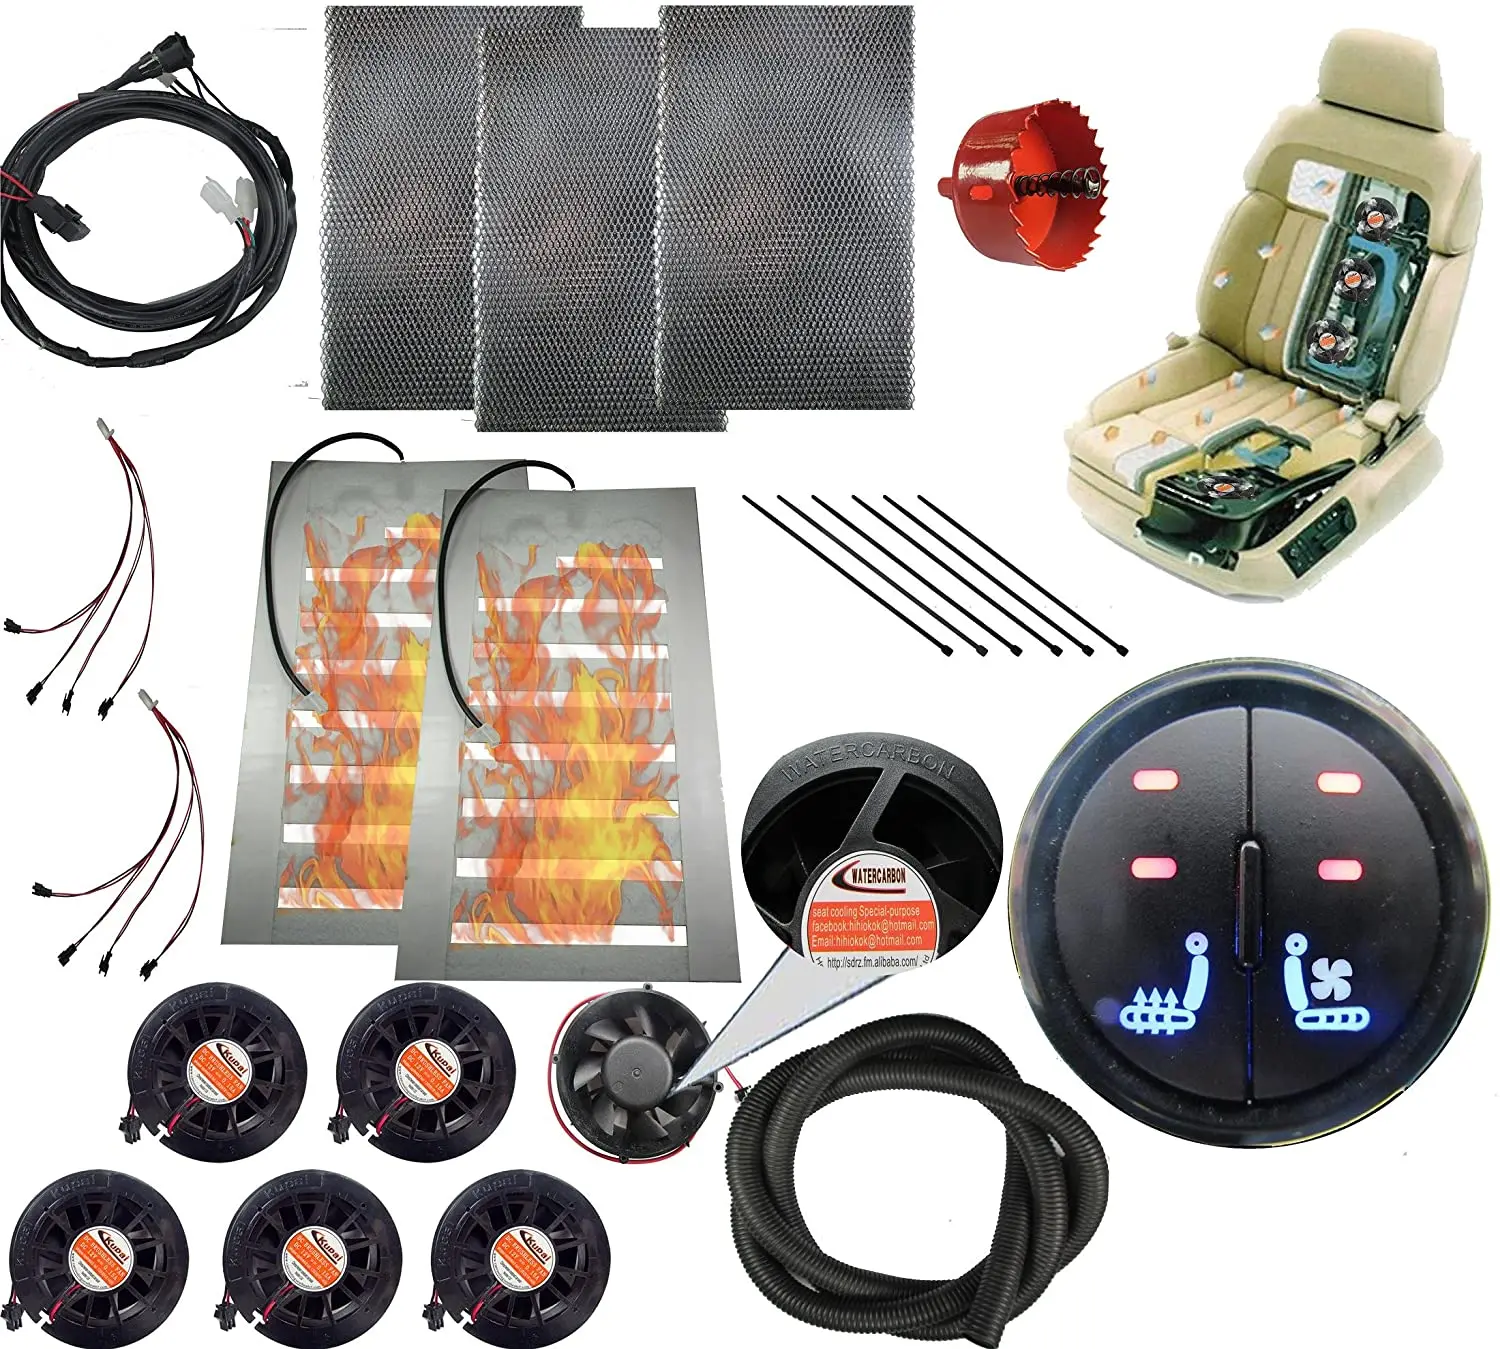 

WATERCARBON 12v car Heated and Cooled seat pad Kits System Left/Heated Right/Cooling 2 Button Round Switch Automotive seat Warme